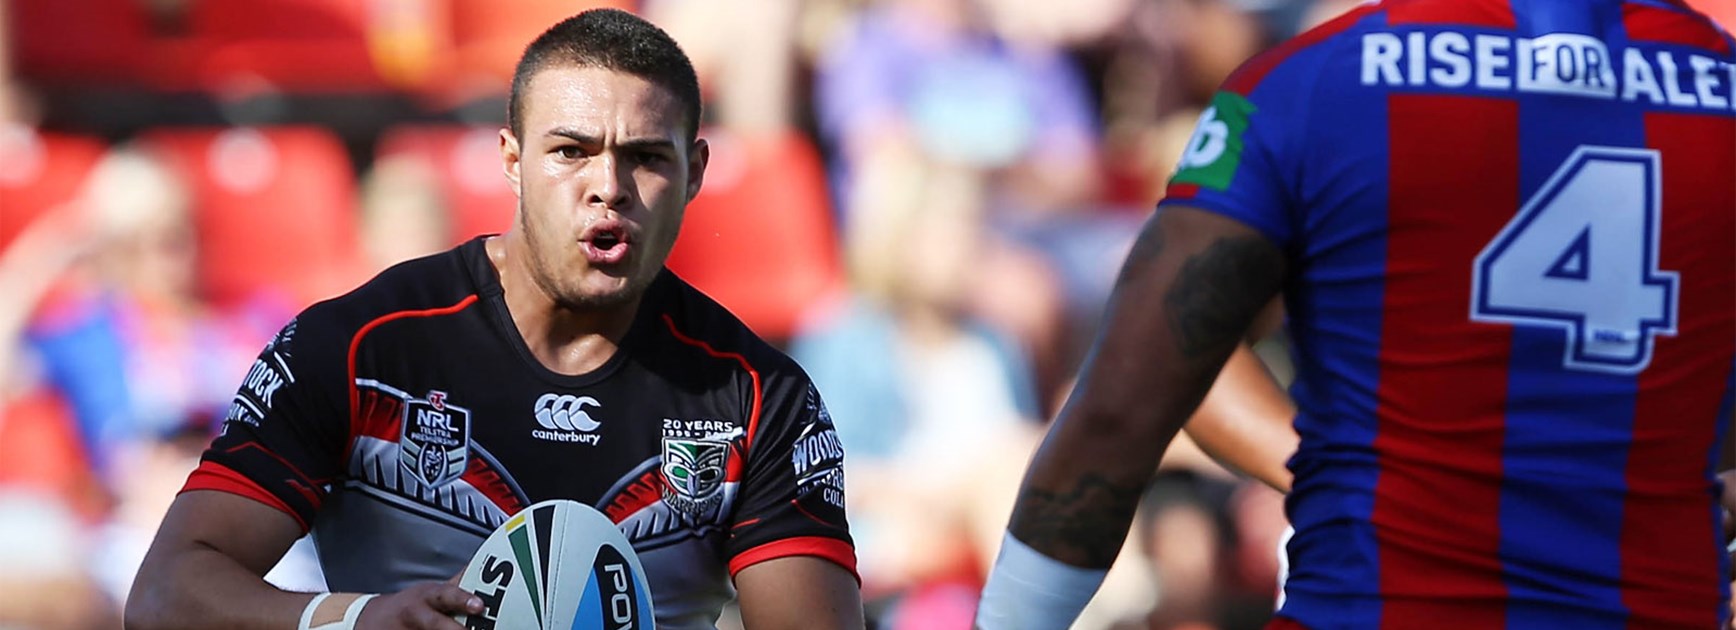 Fill-in fullback Tuimoala Lolohea was a standout for the Warriors in the absence of the injured Sam Tomkins.